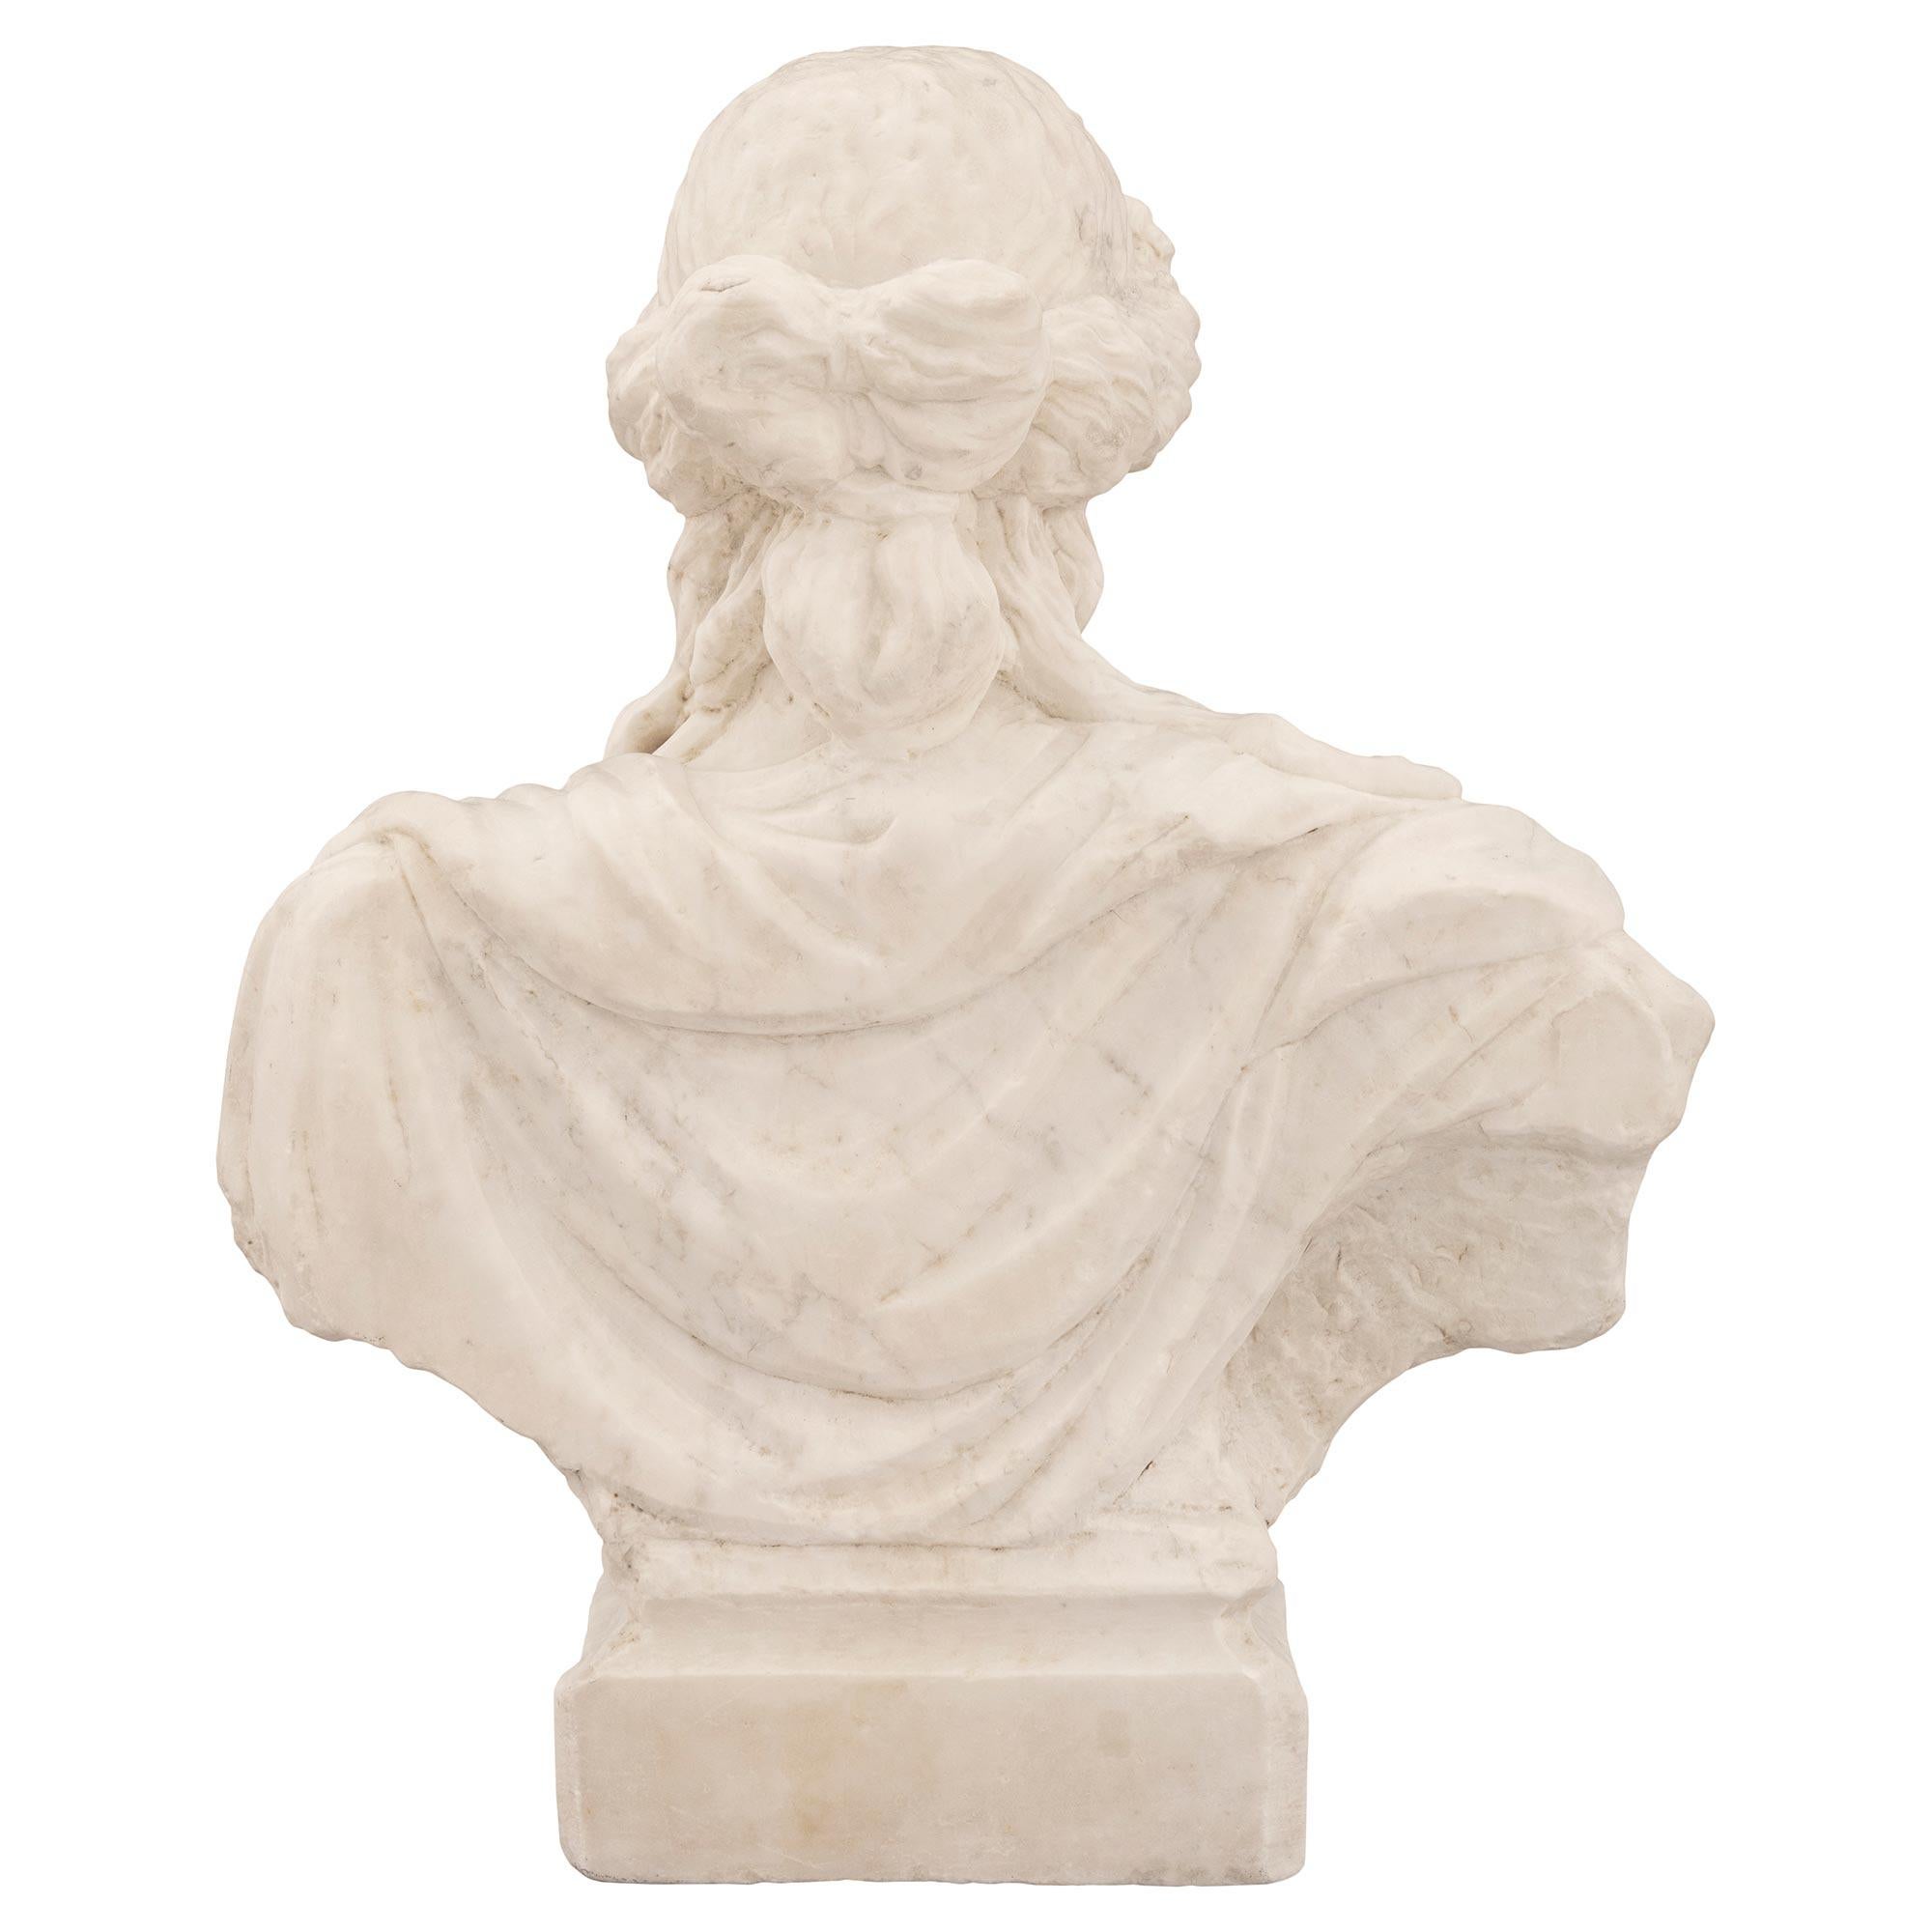 Italian, Late 17th / Early 18th Century, White Carrara Marble Bust of Athena For Sale 6